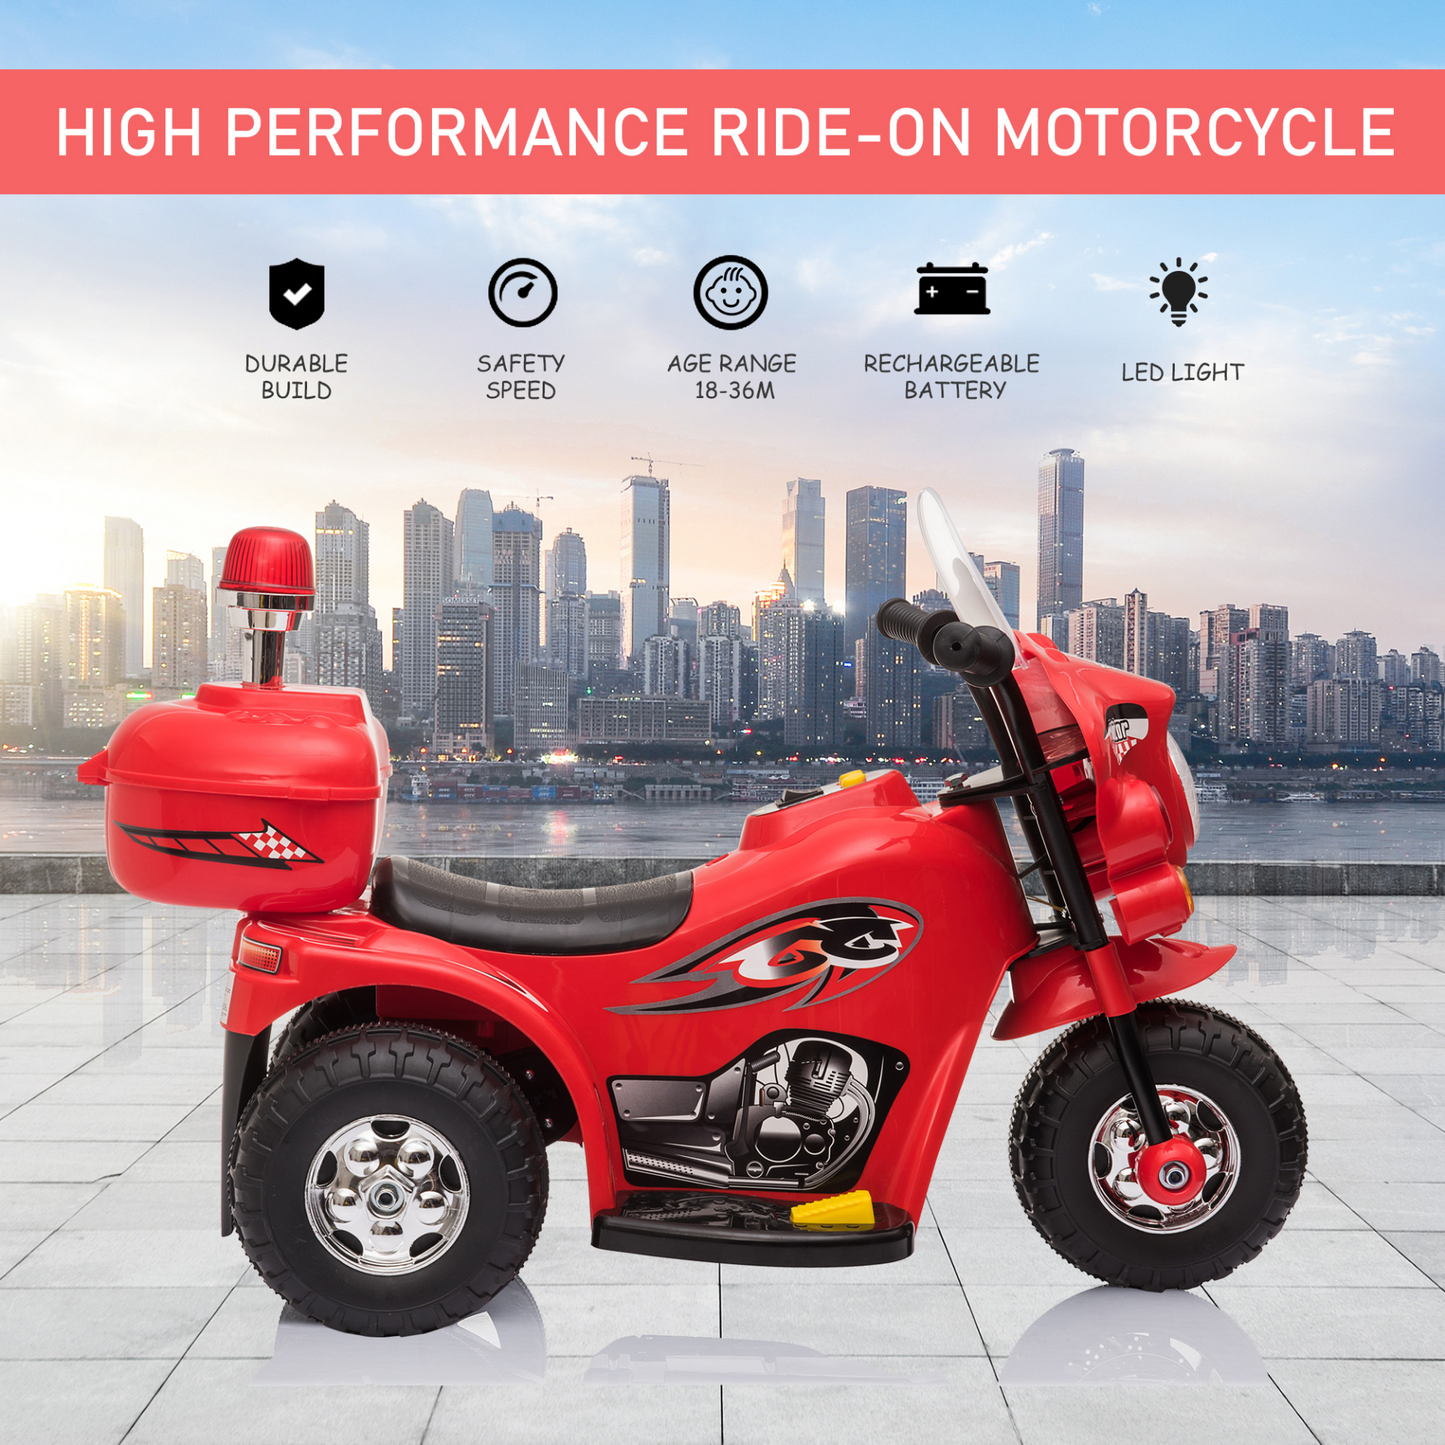 HOMCOM Kids 6V Electric Ride On Motorcycle 3 Wheel Vehicle Lights Music Horn Storage Box Outdoor Toy for 18 - 36 Months Red